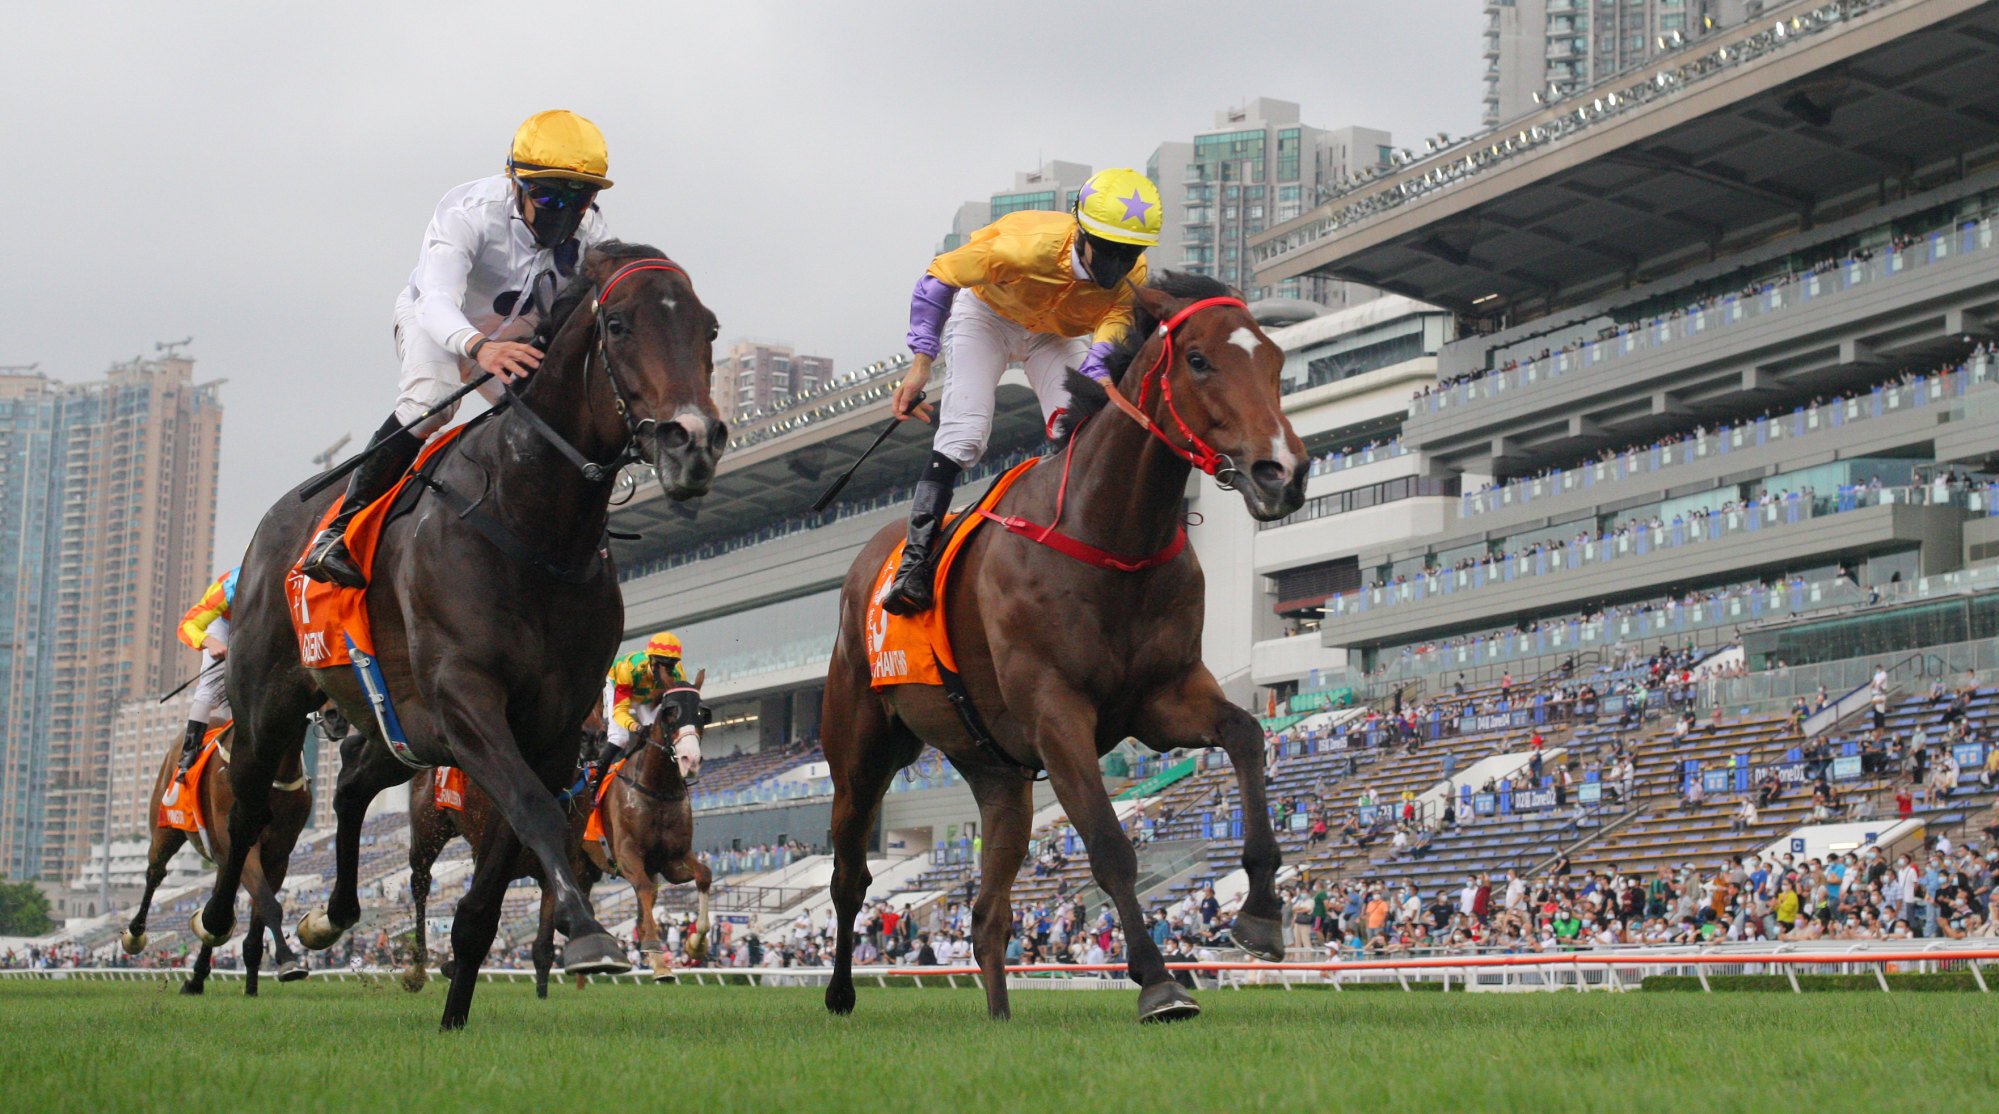 Fans watch on as Golden Sixty (left) beats More Than This to win the Champions Mile.